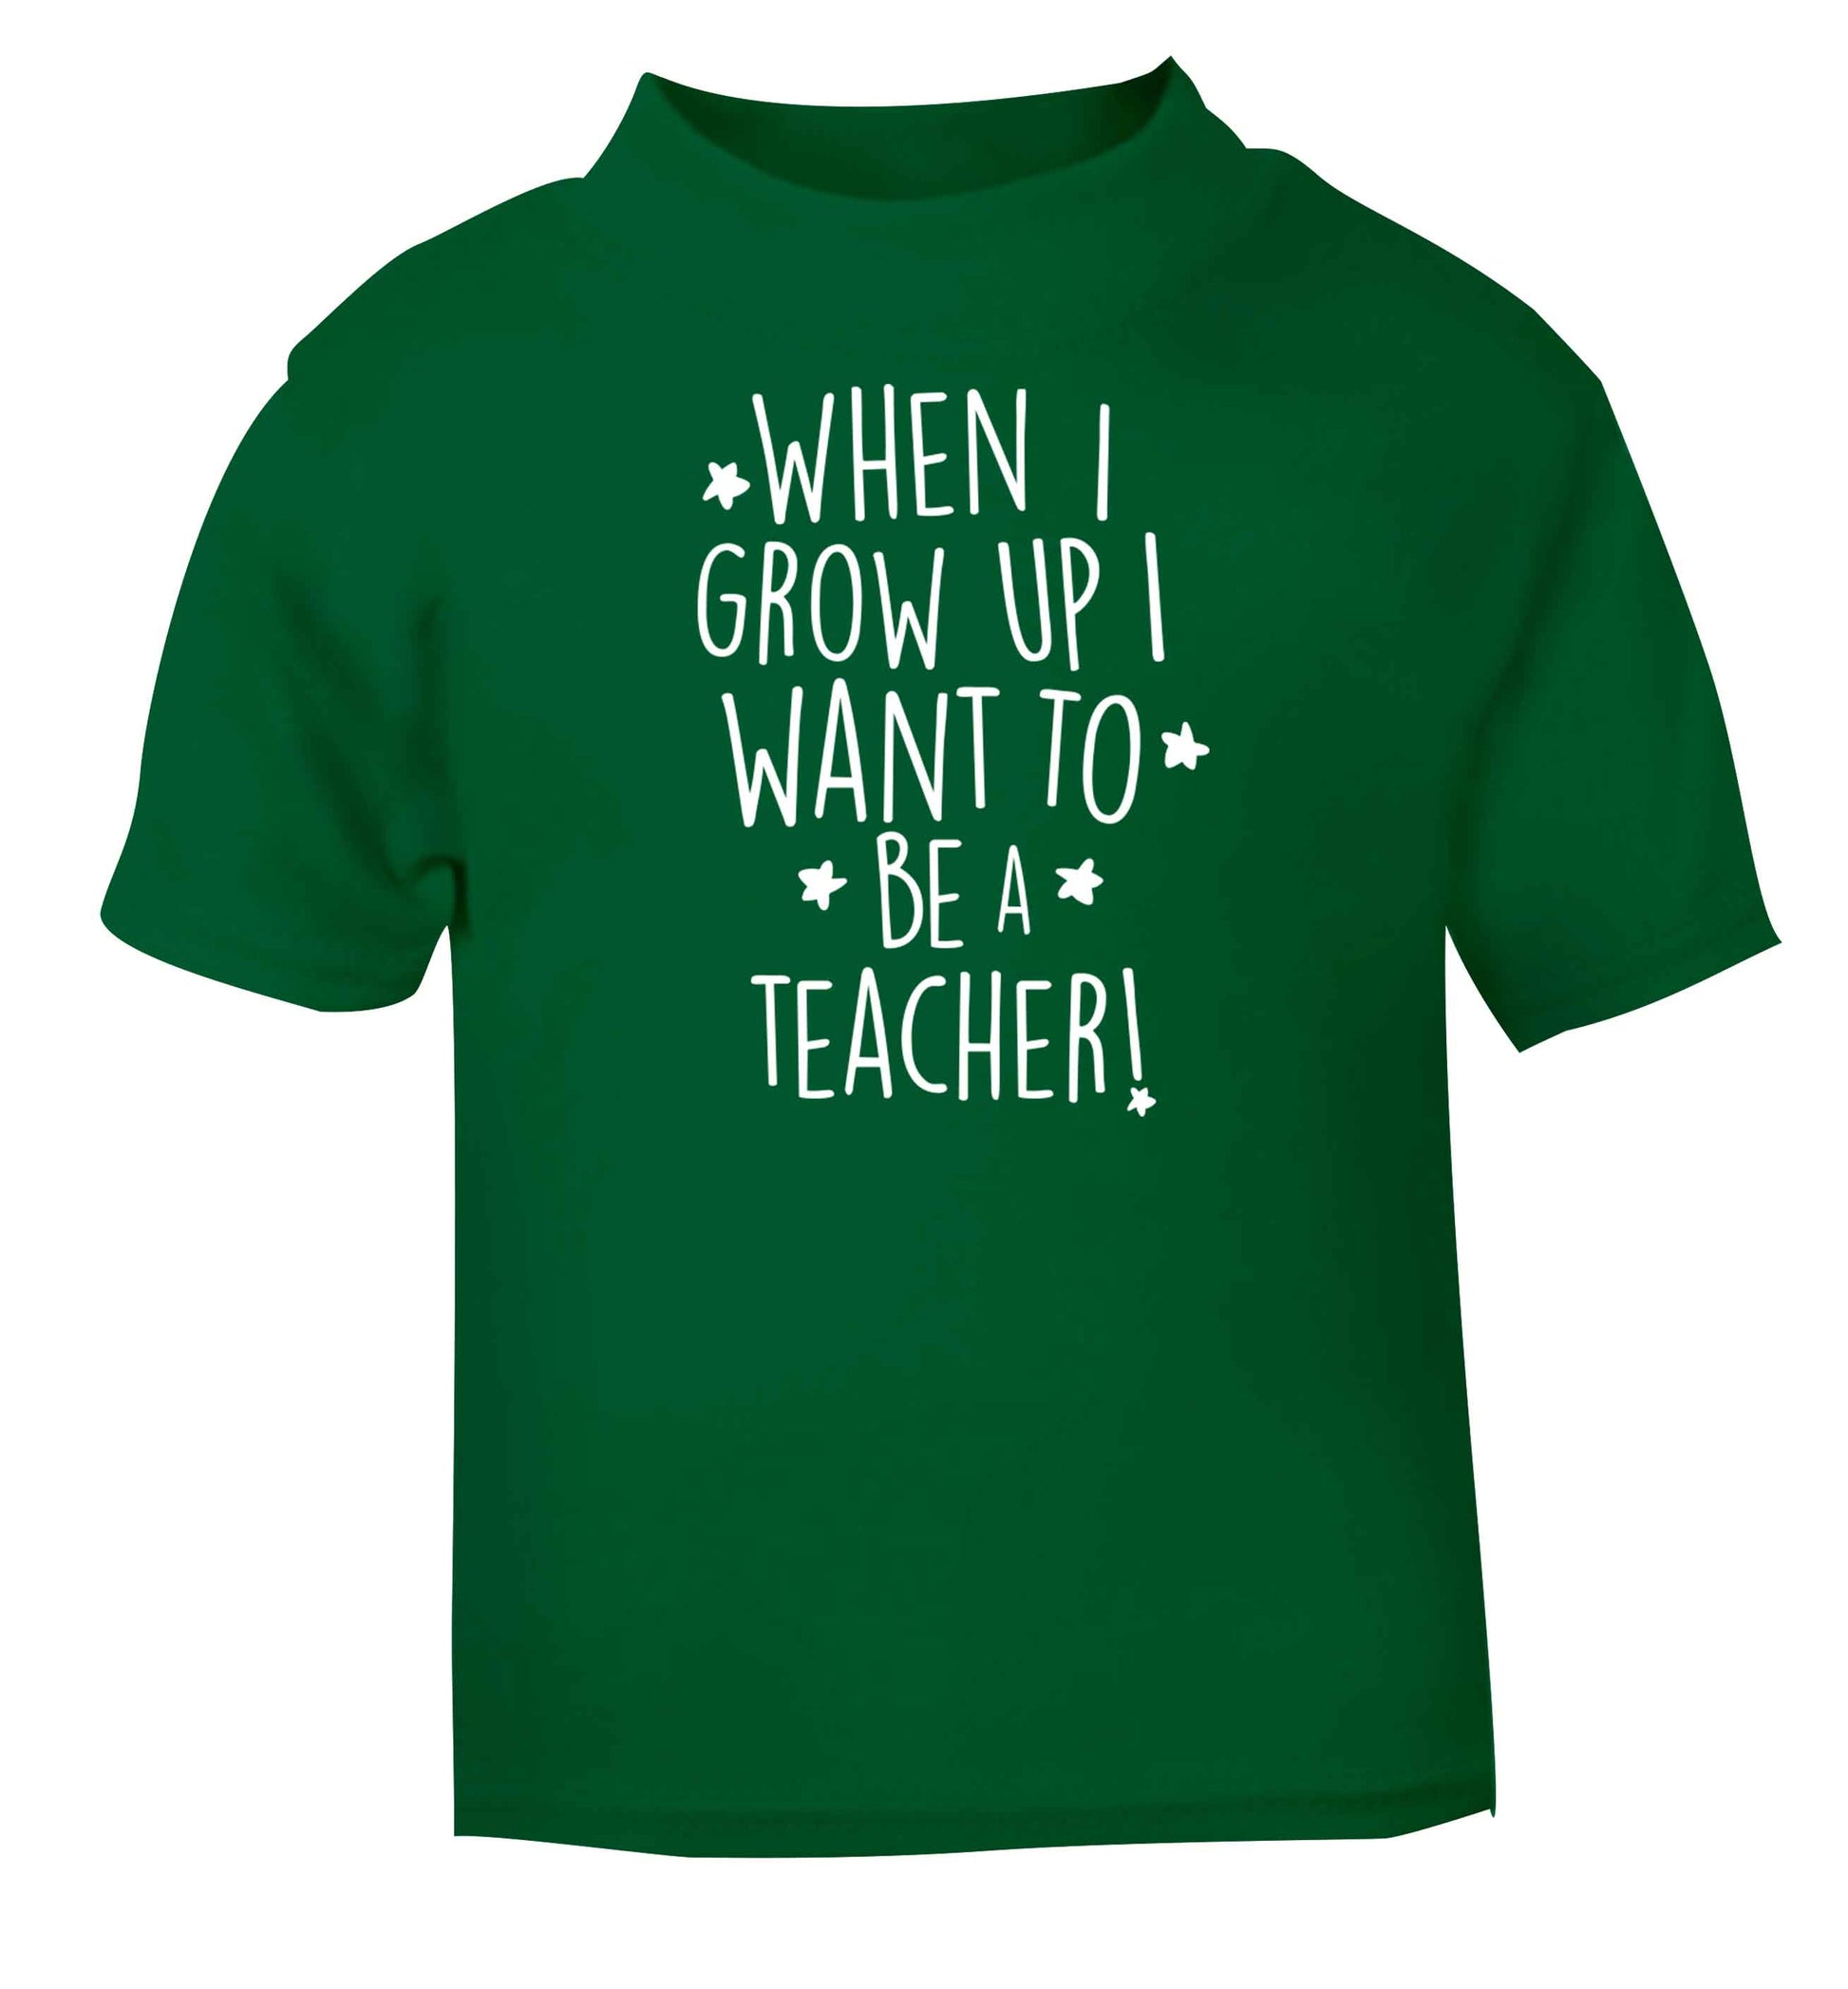 When I grow up I want to be a teacher green baby toddler Tshirt 2 Years